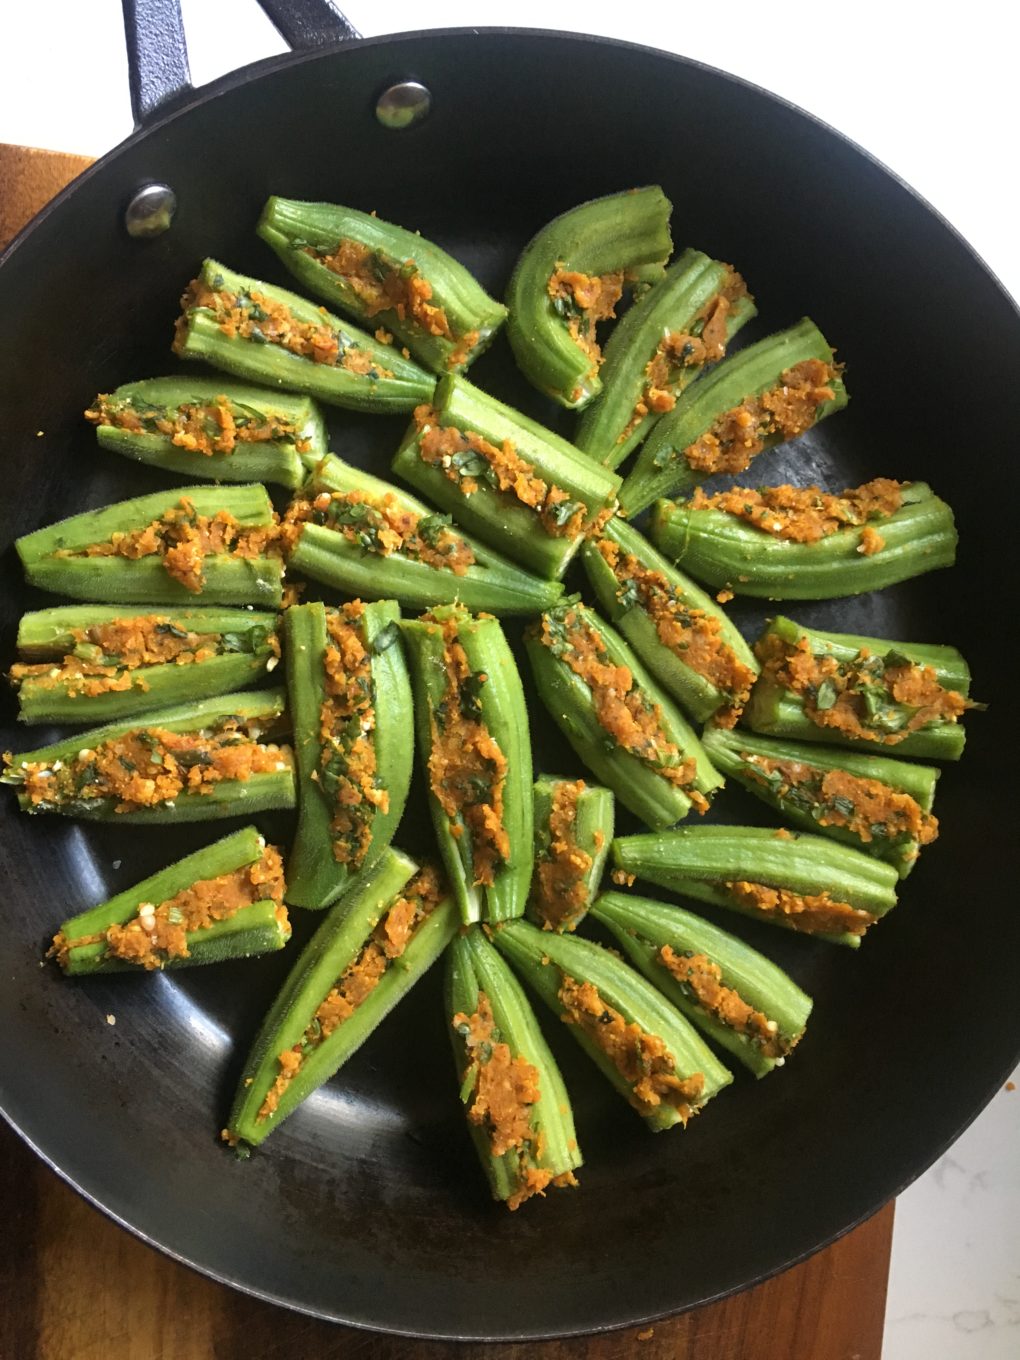 Stuff the okra and arrange it in the pan